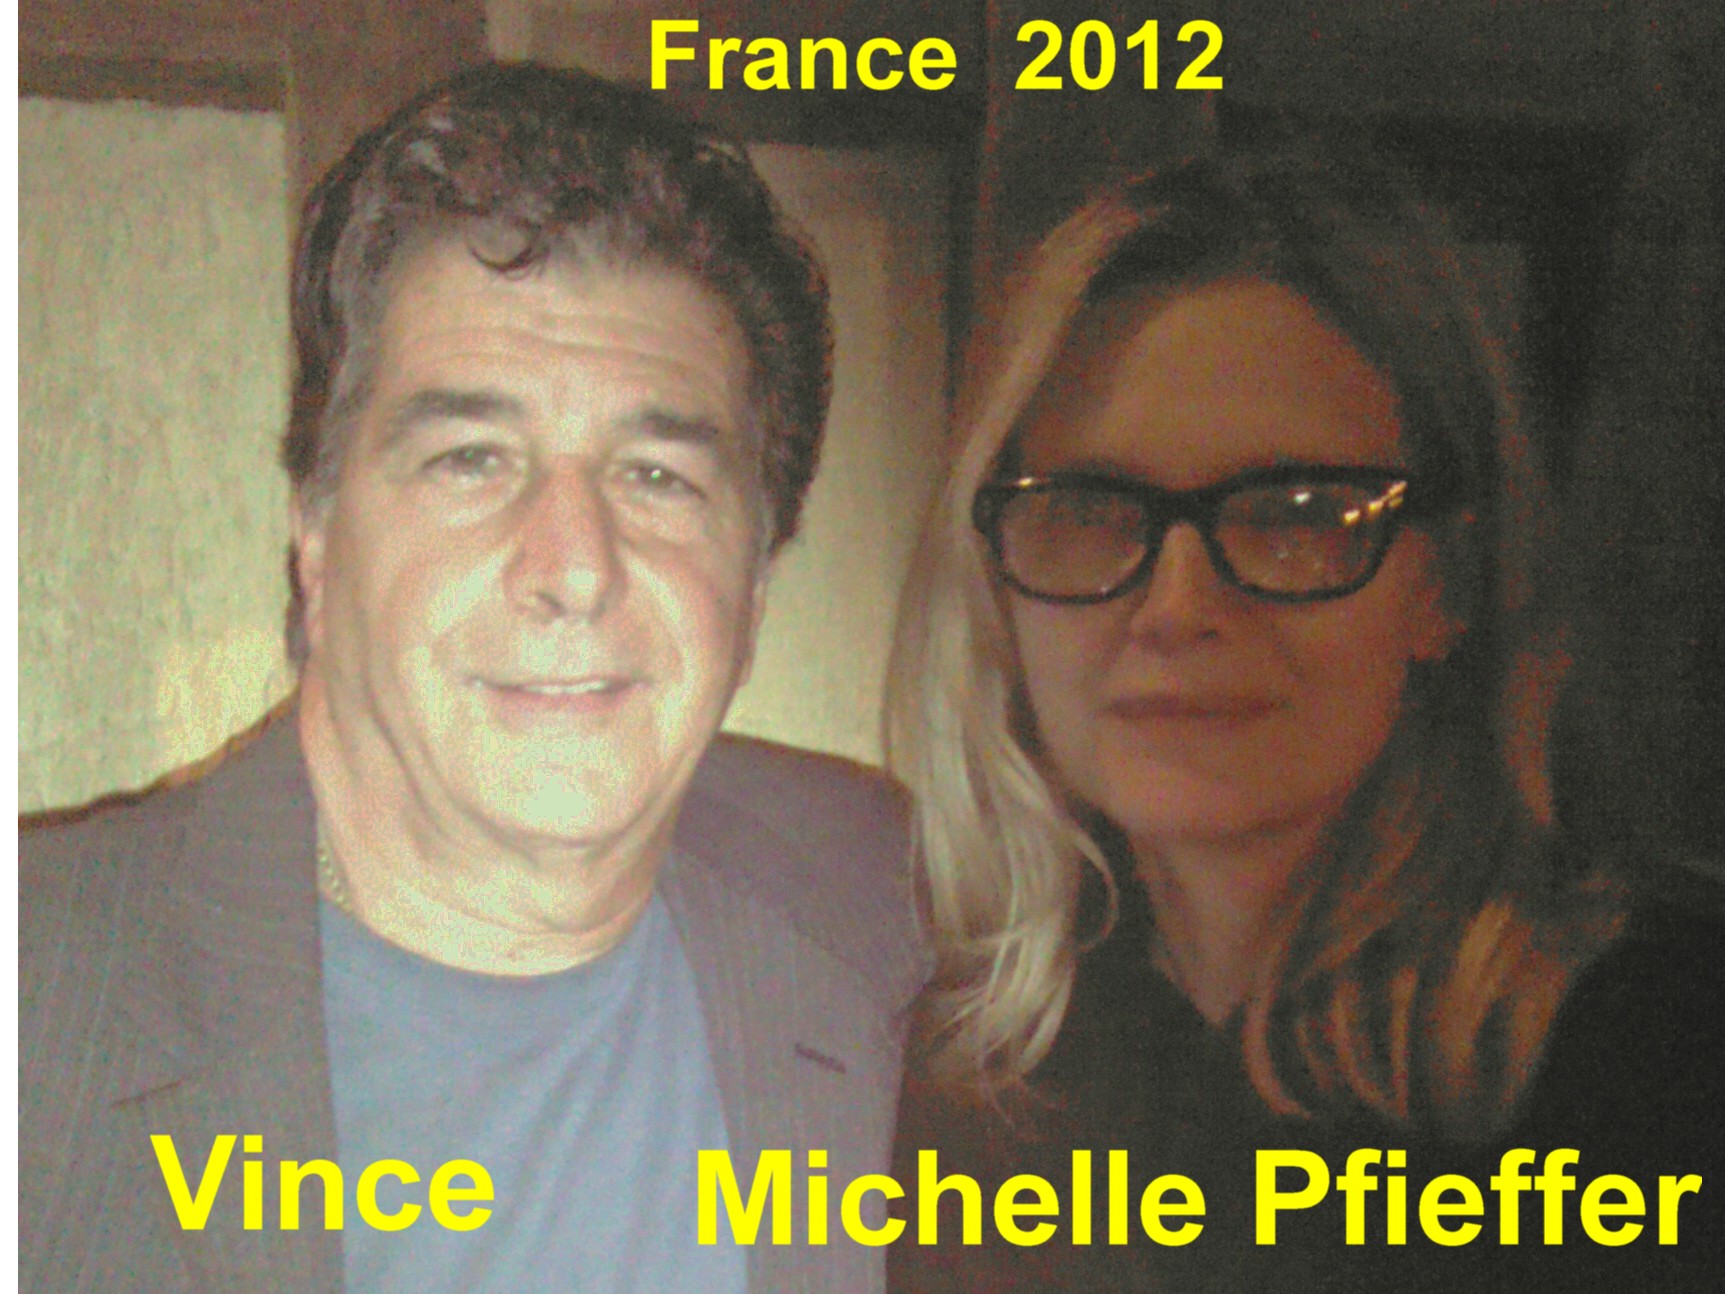 Vincent Riviezzo and Actress Michelle Pfieffer Normandy France 2012